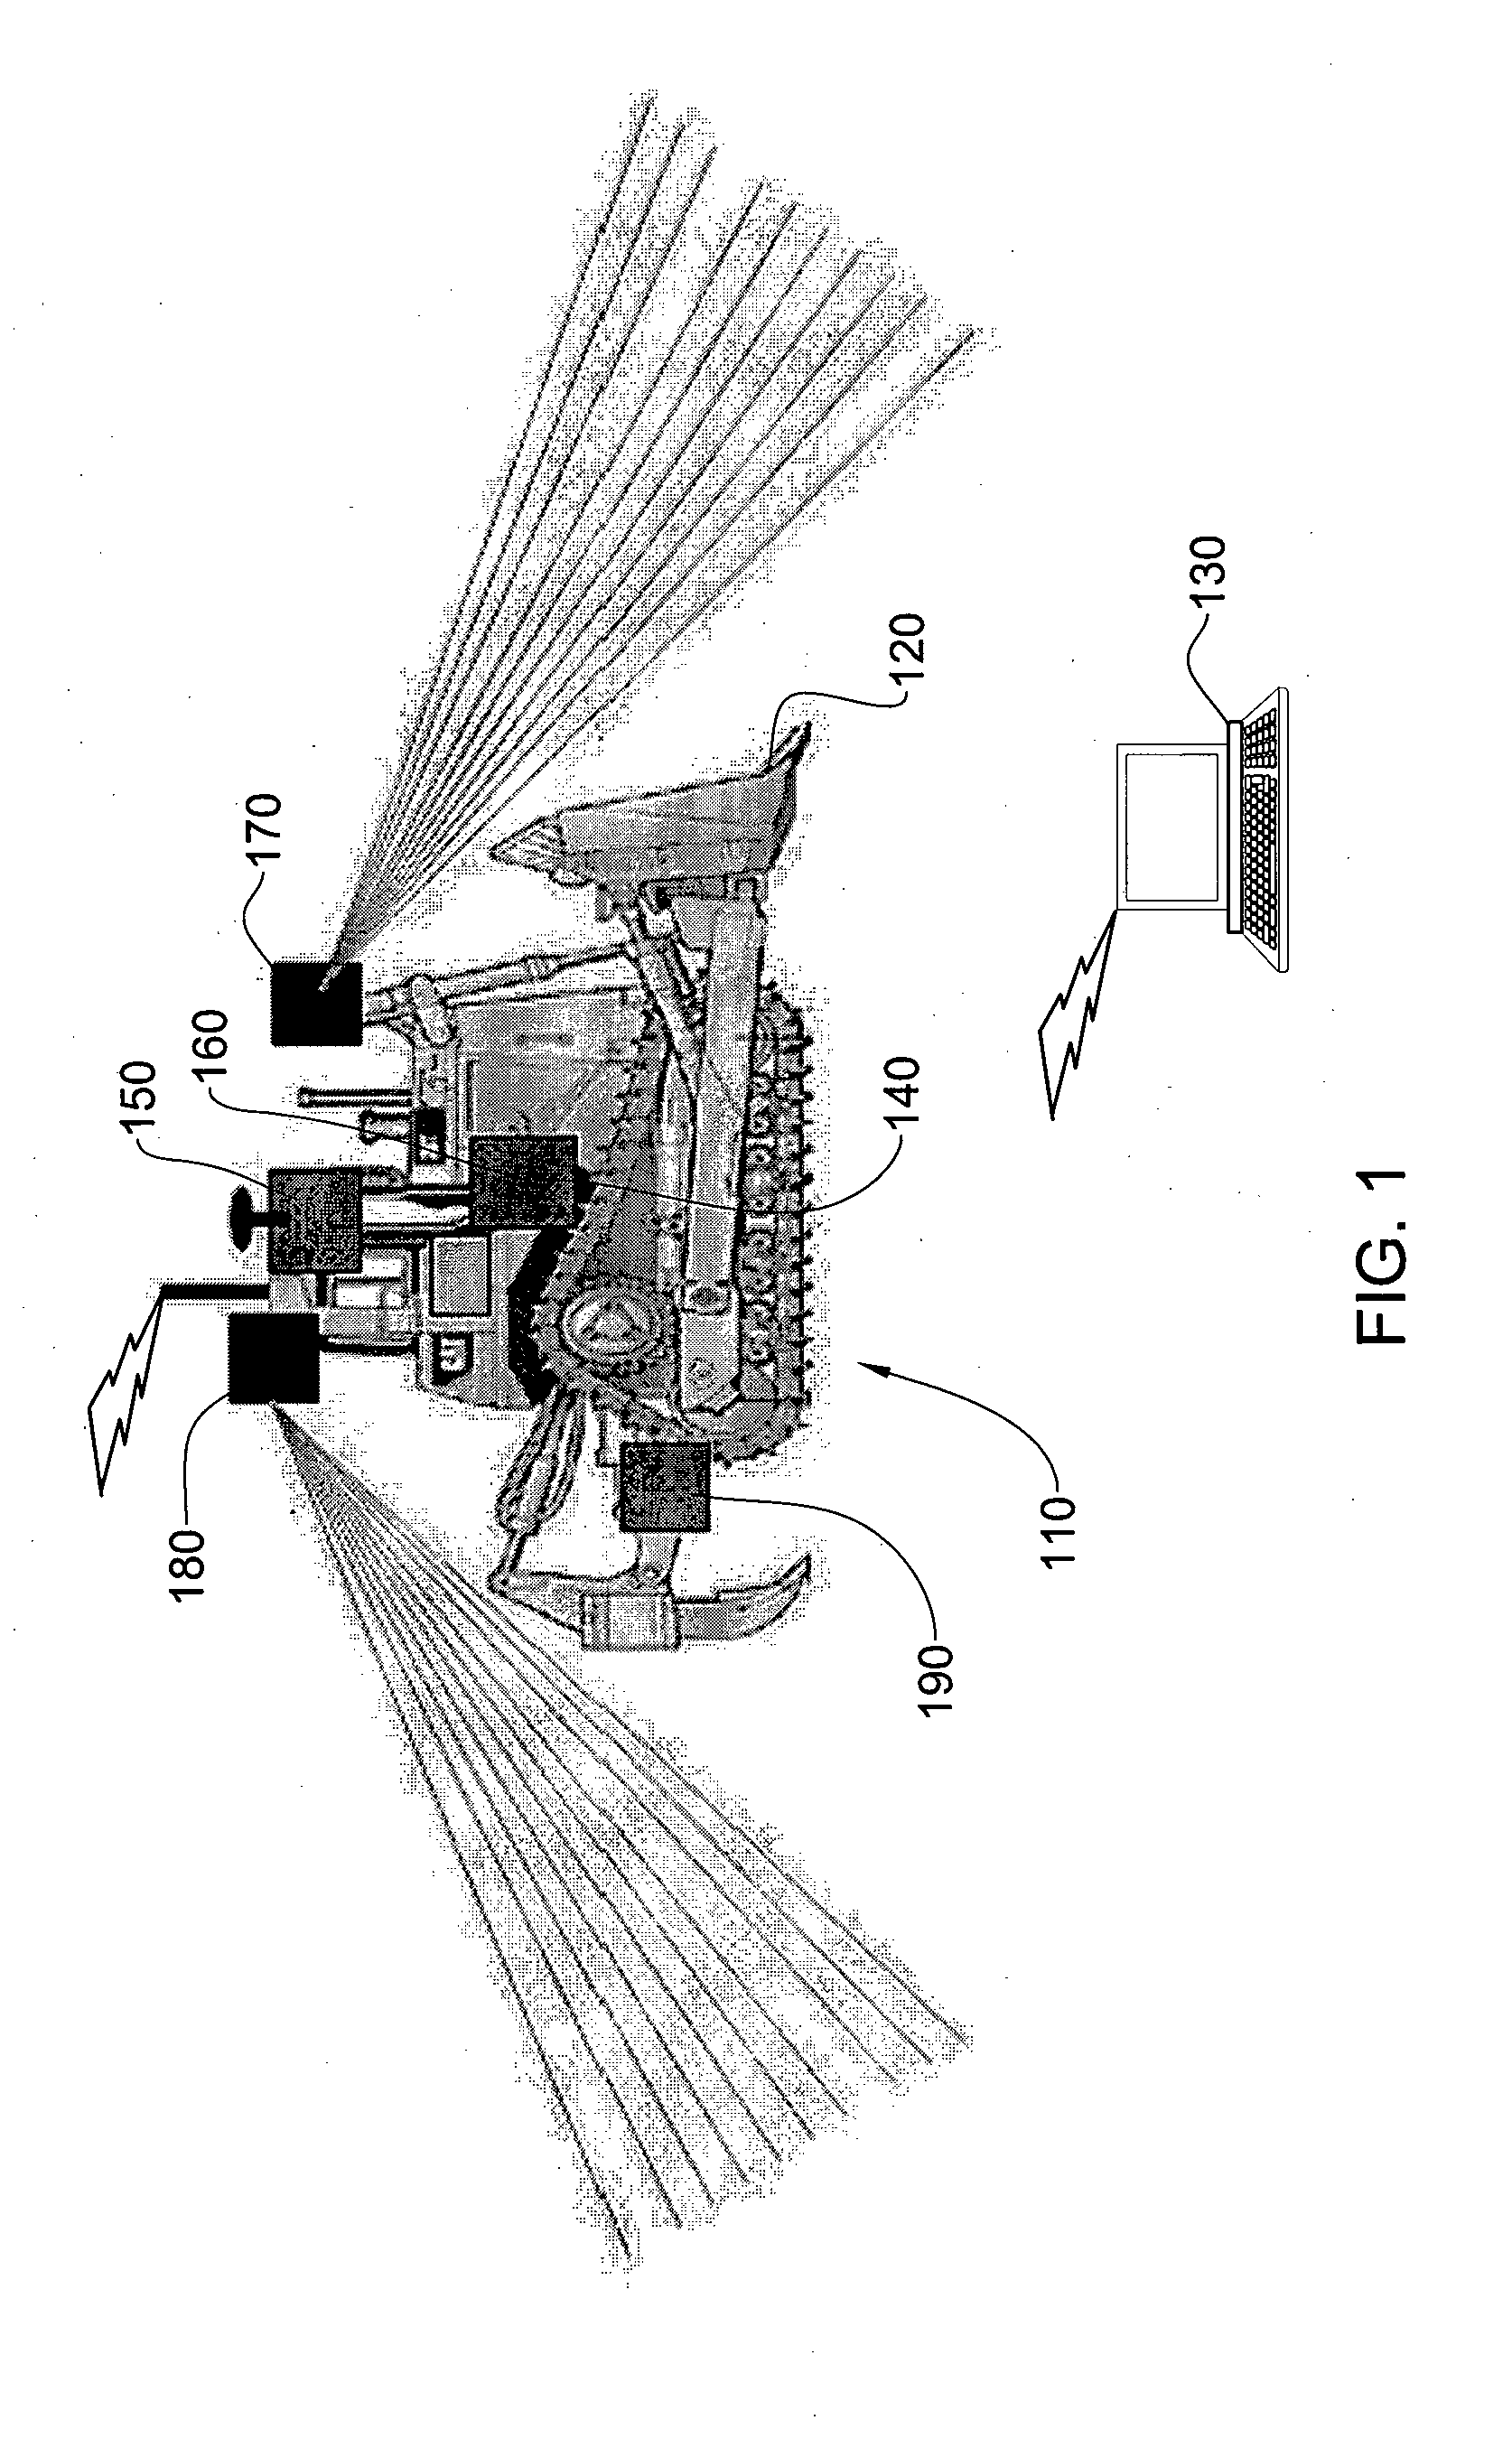 System and method of autonomous operation of multi-tasking earth moving machinery